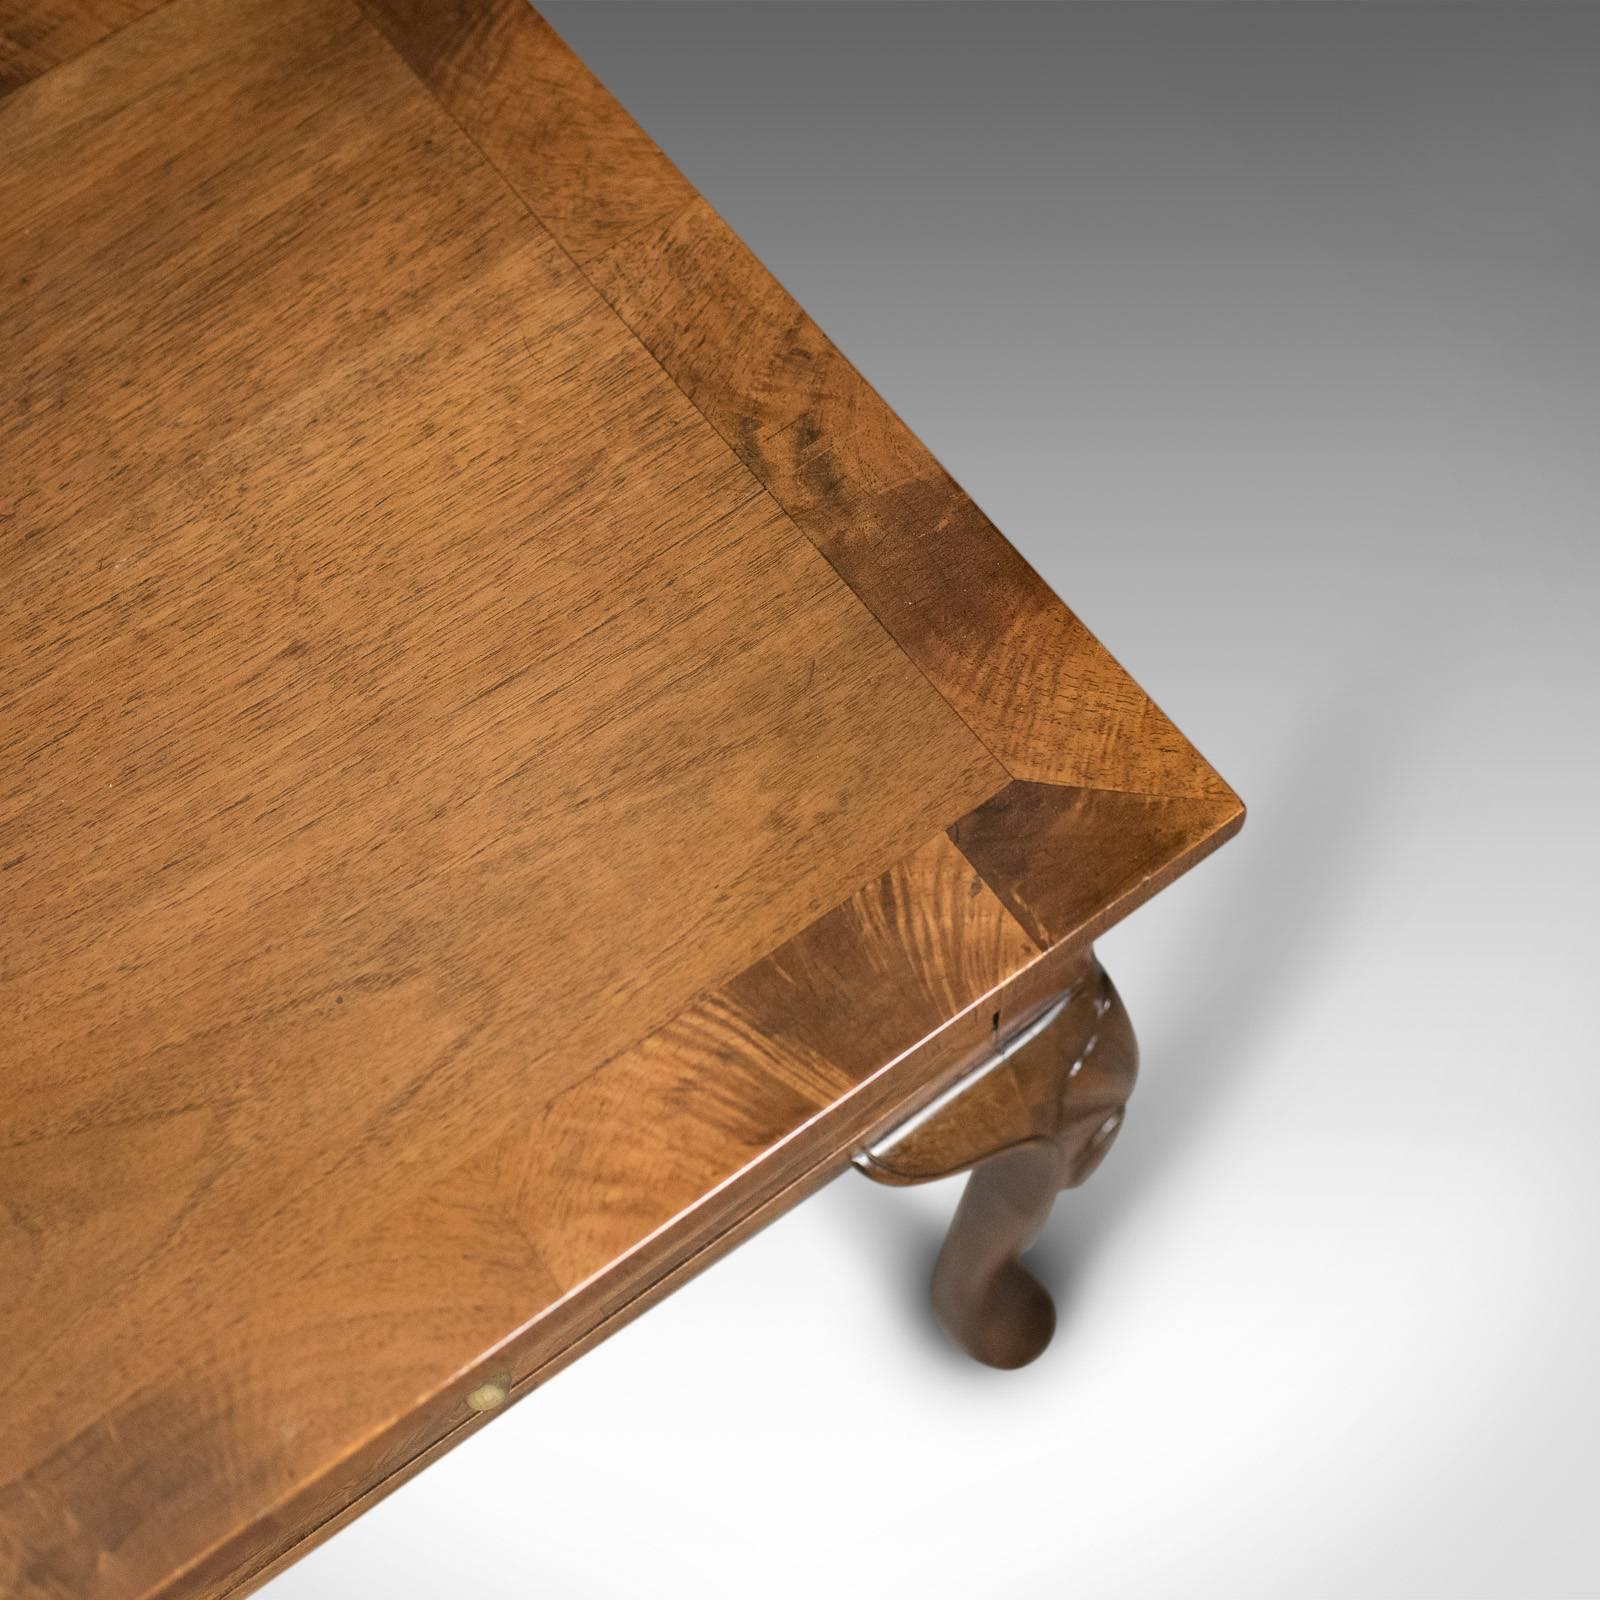 20th Century Edwardian Antique Side Table with Drawers, English, Walnut, circa 1910